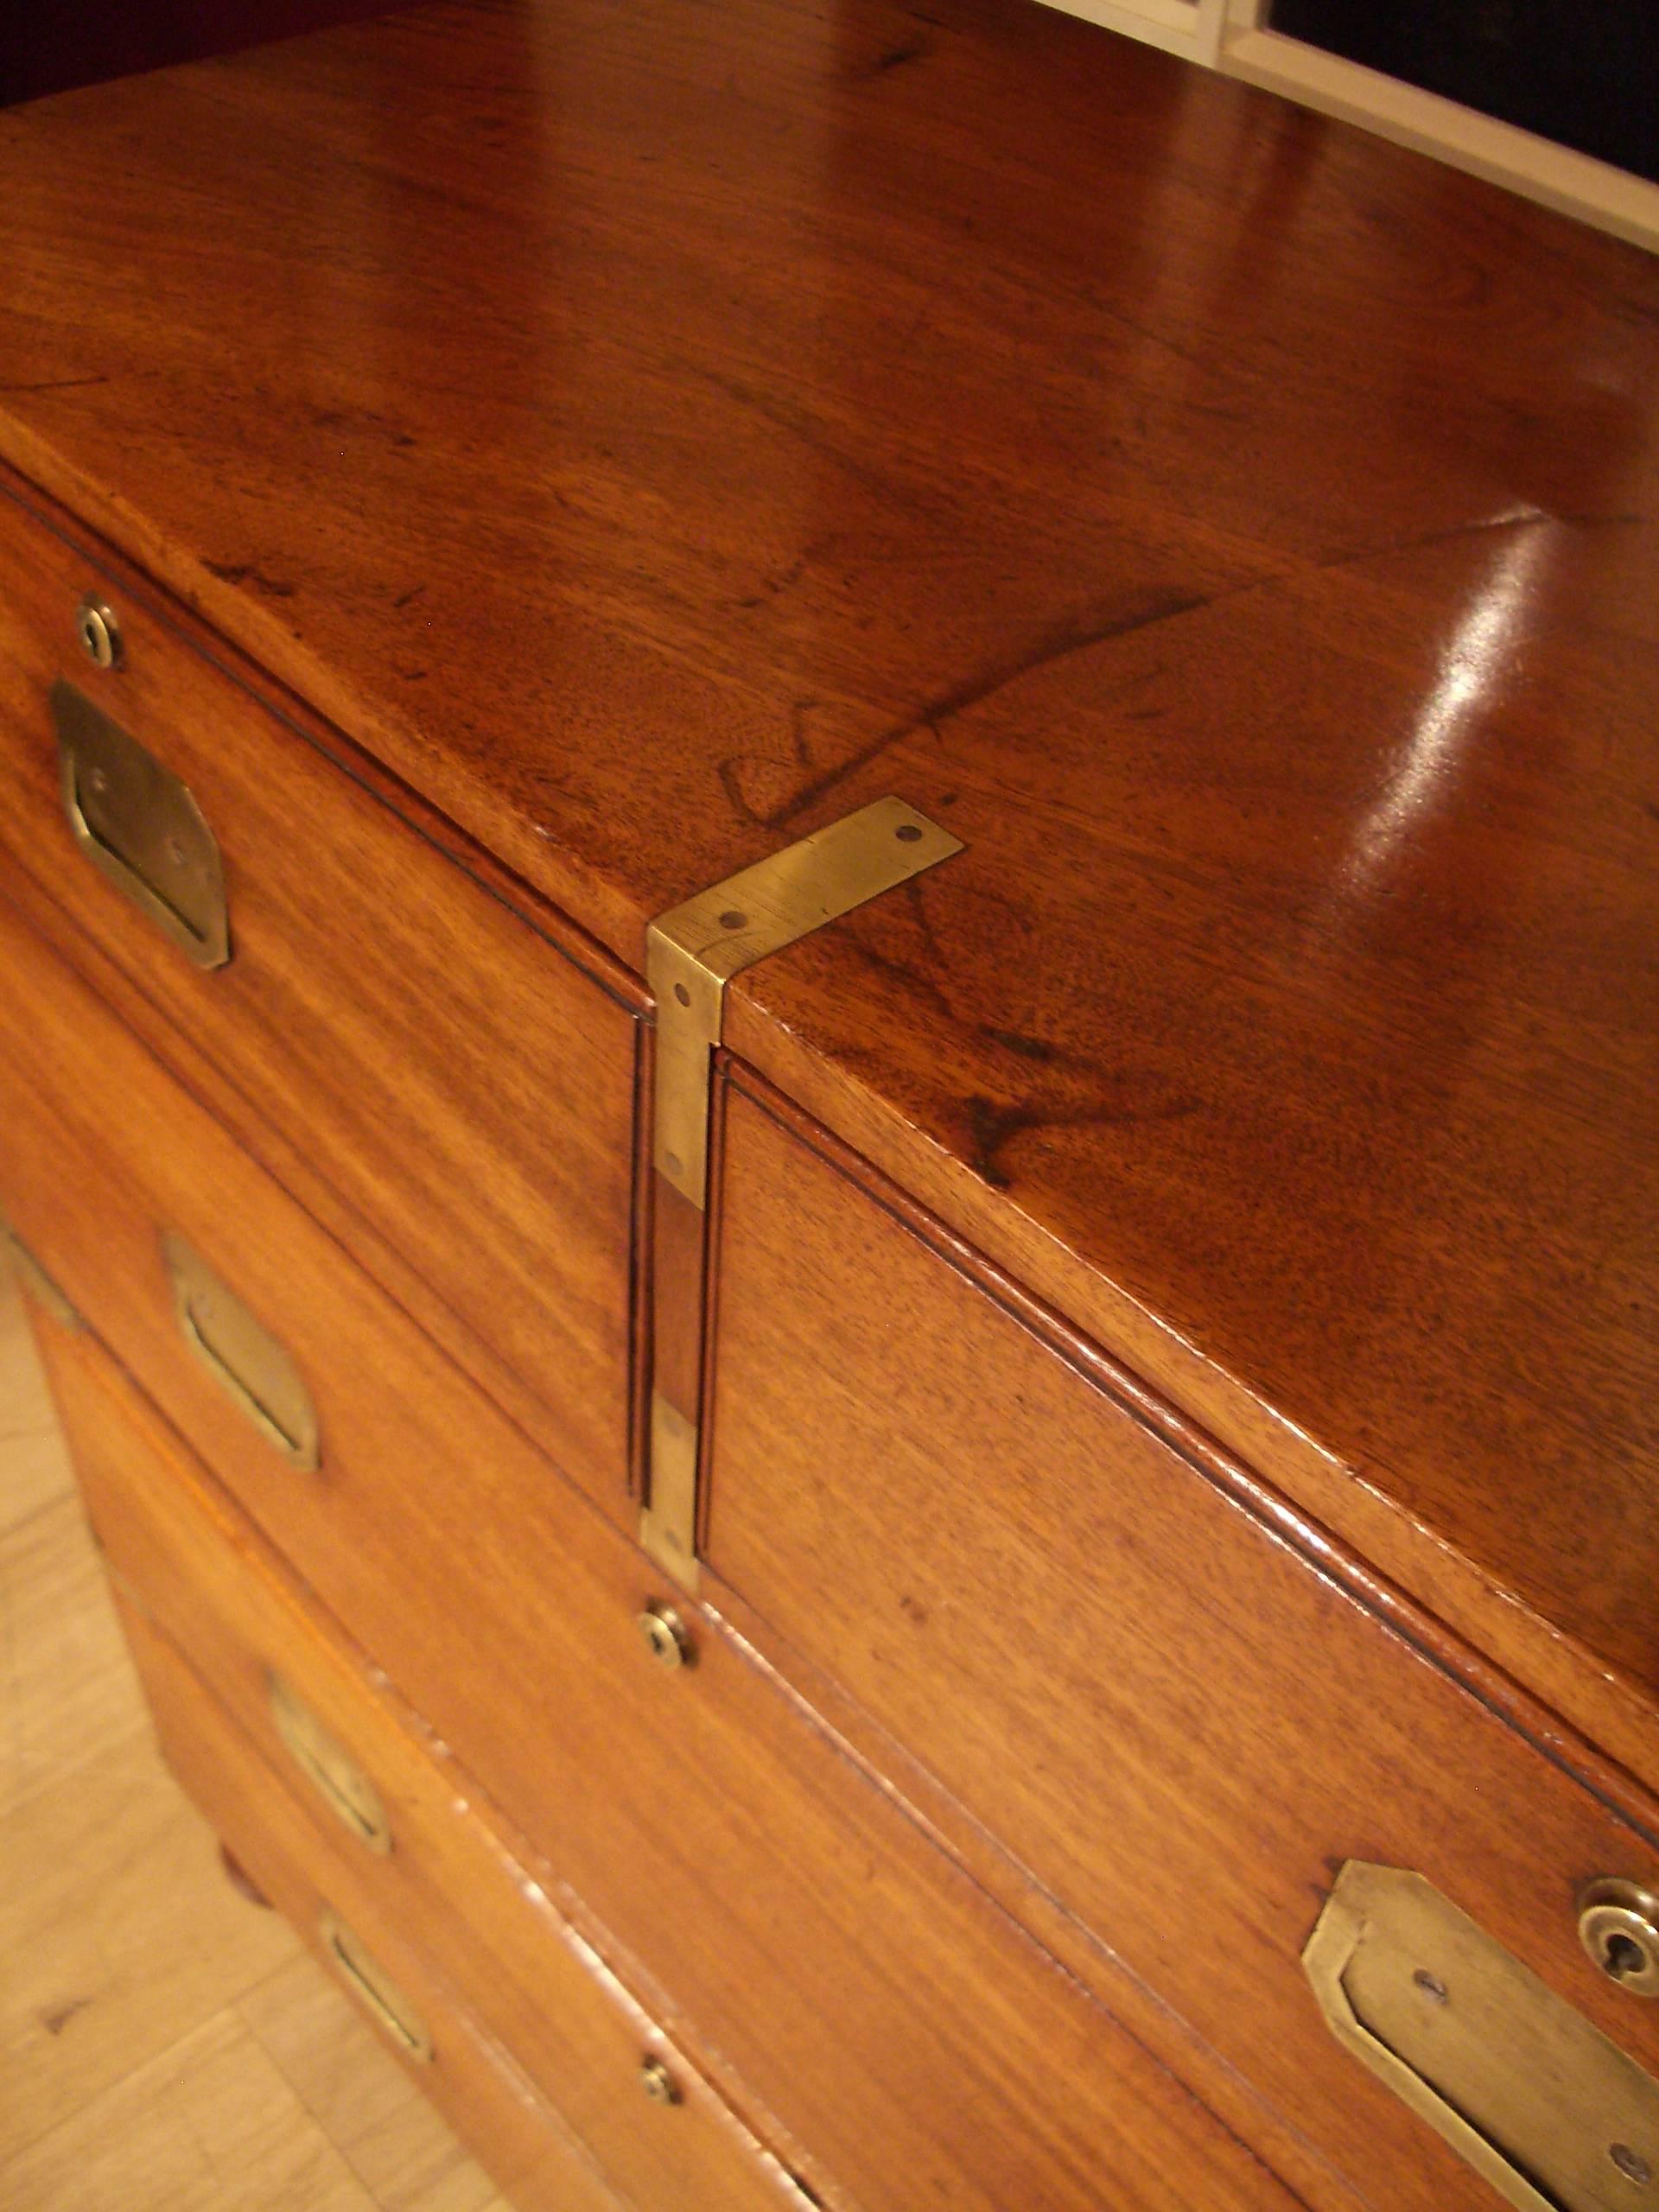 Beautiful campaign dresser in two parts. Particular type of handle, is not common. As usual with a campaign dresser drawer tractors are flat and the corners are fitted with brass corners. Legs are not removable. Mahogany has a beautiful warm light